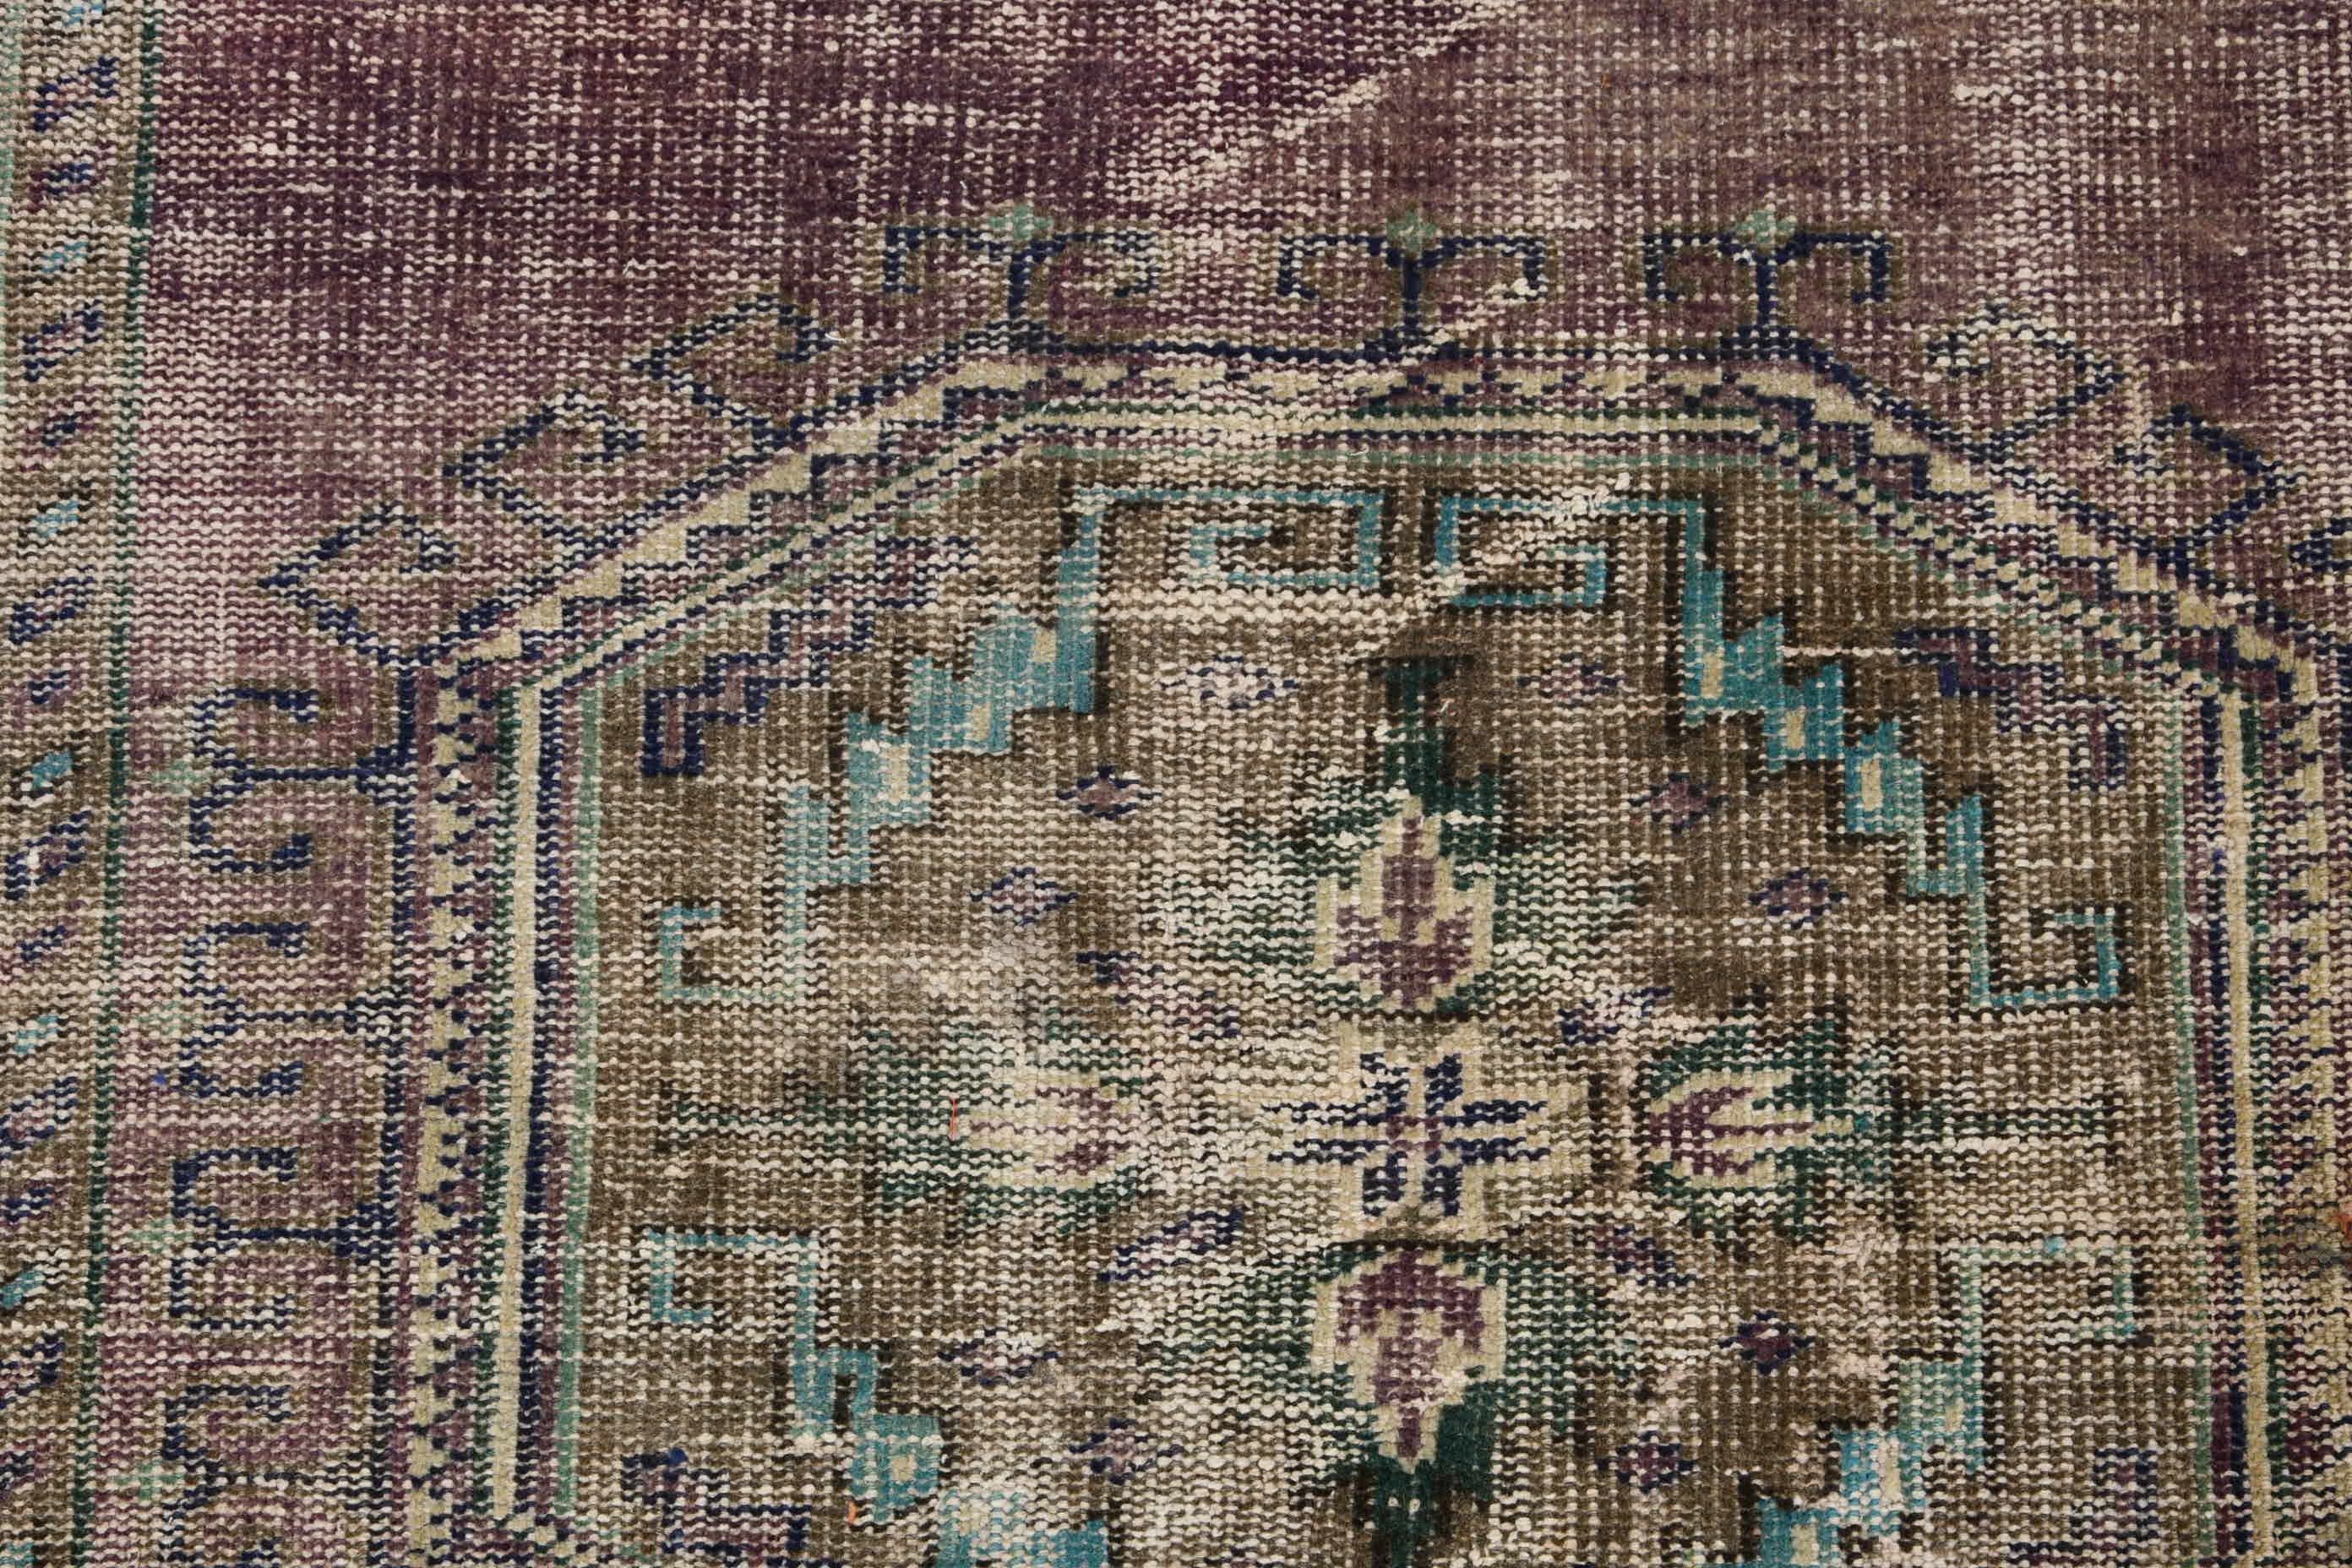 Wool Rug, Rugs for Car Mat, Turkish Rug, Bath Rugs, Antique Rug, 2x3.5 ft Small Rugs, Purple Home Decor Rug, Entry Rugs, Vintage Rug